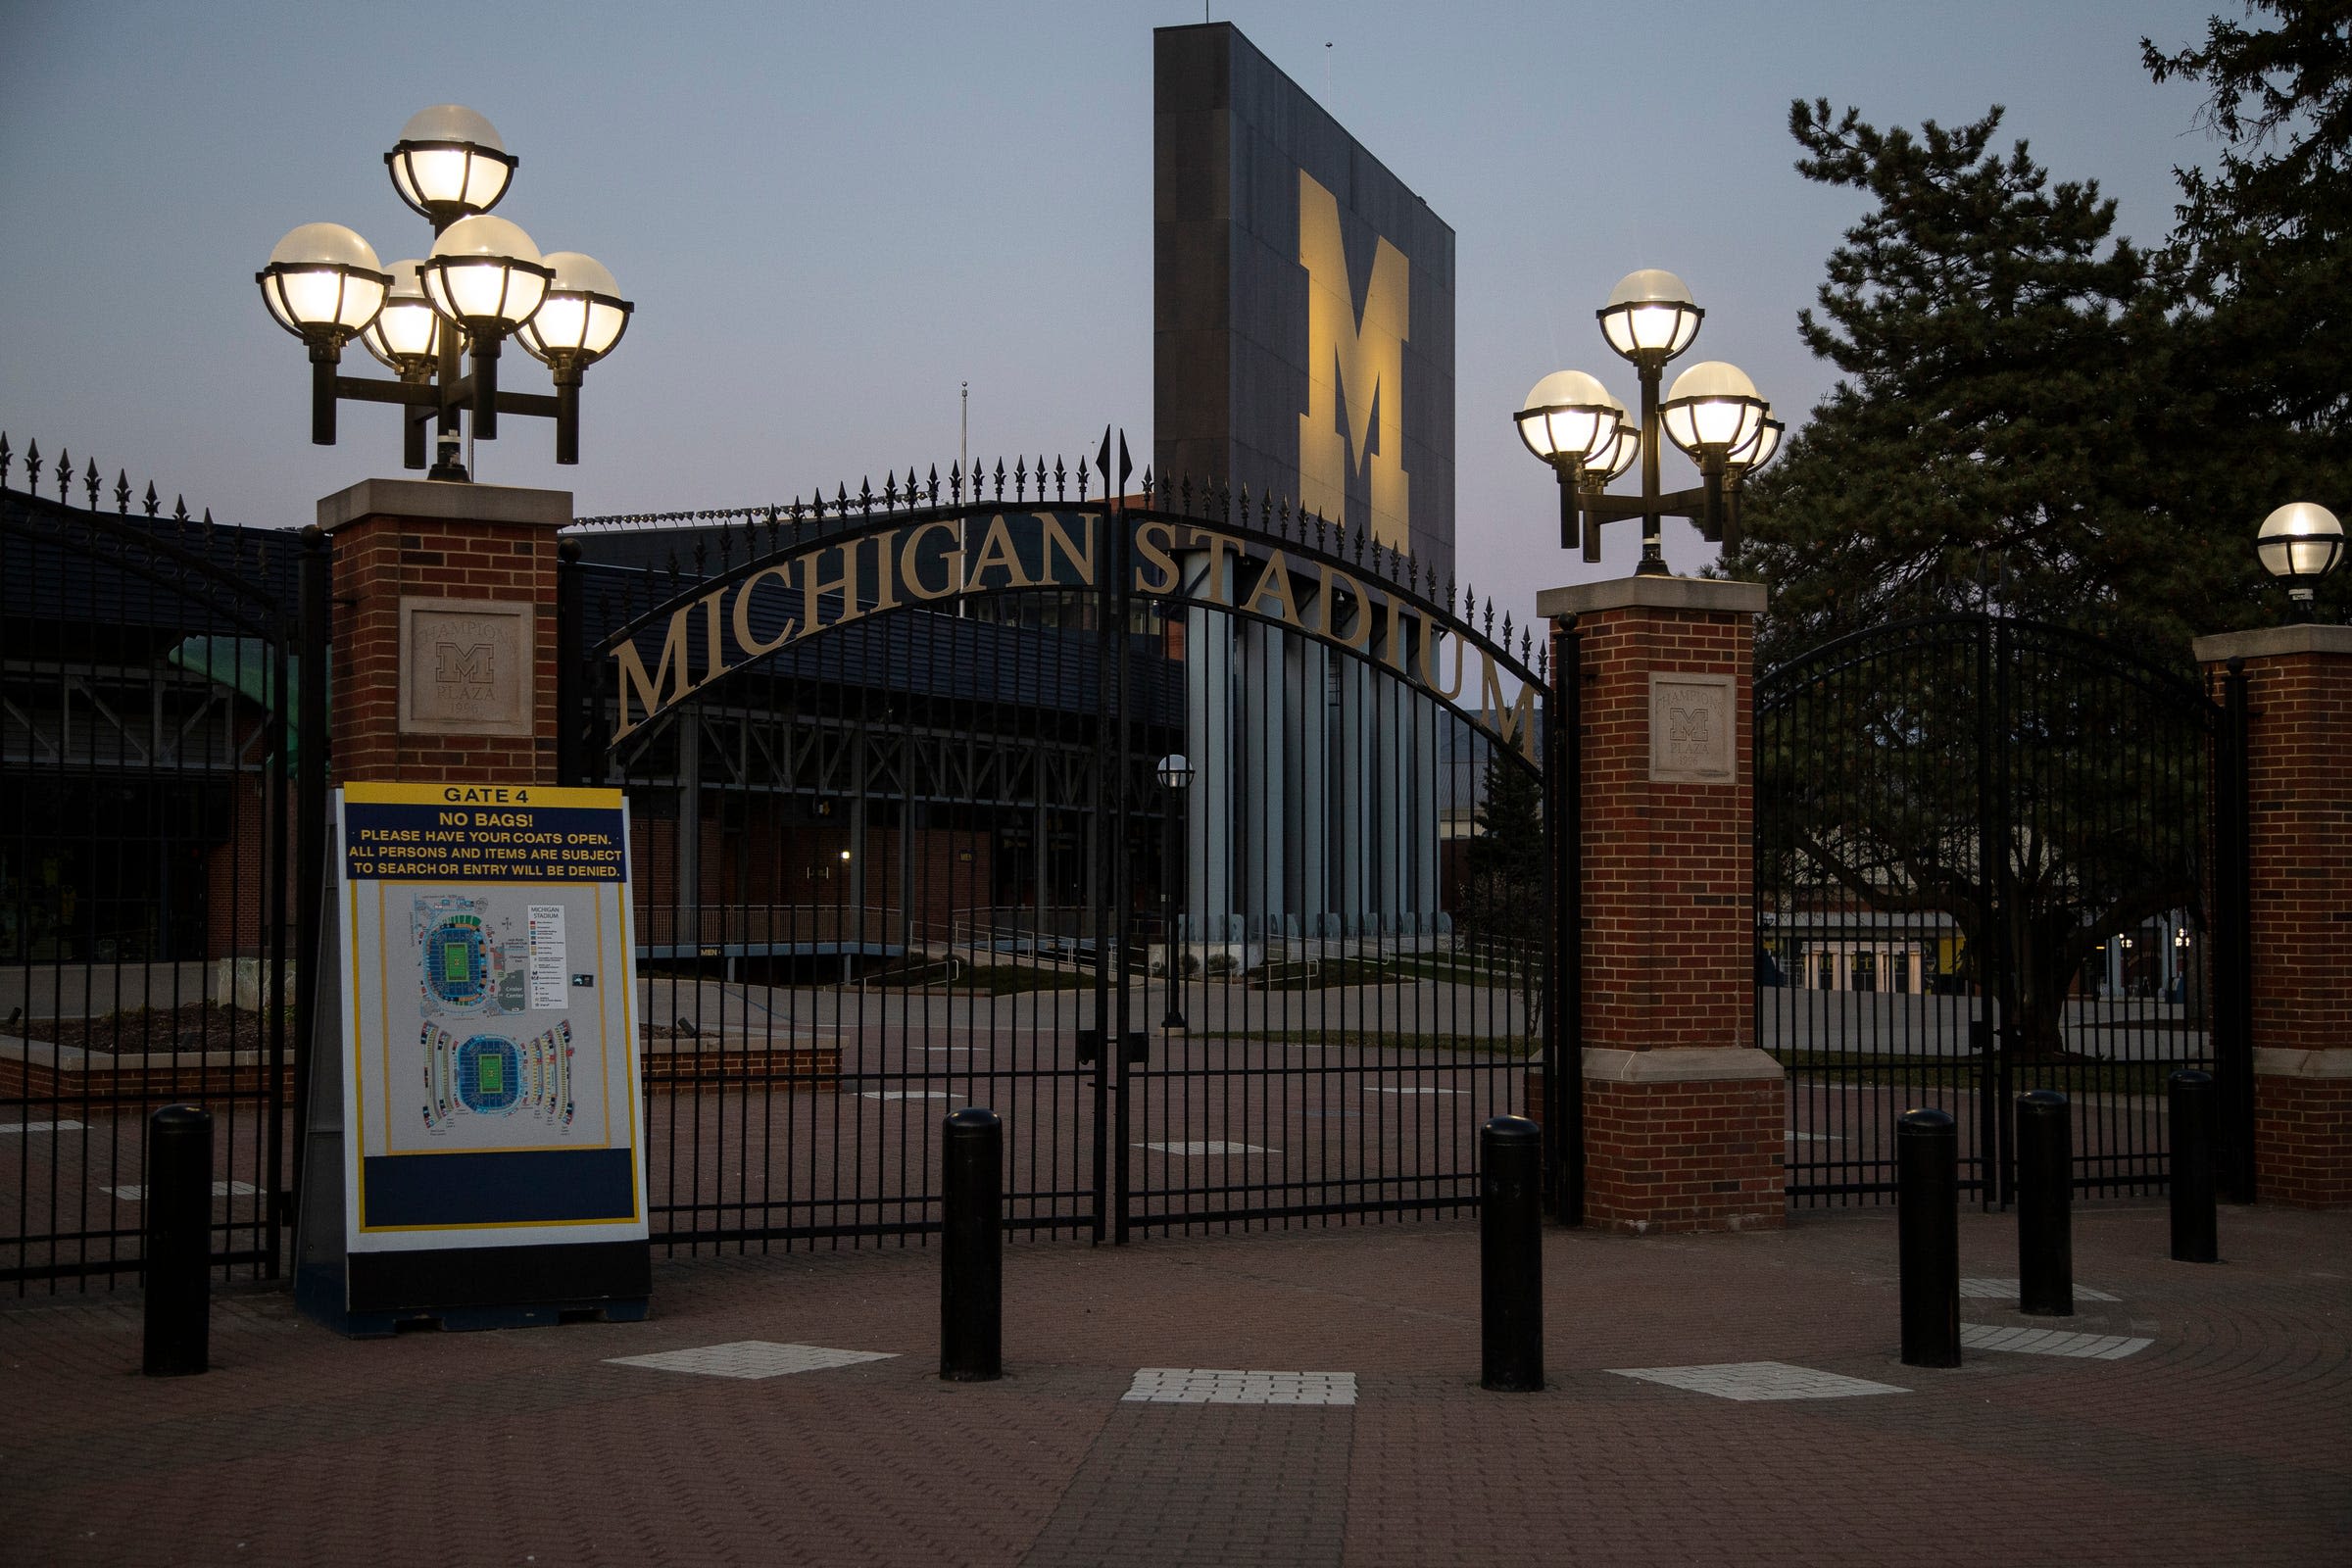 Michigan Stadium rated as the No. 3 college football venue by ESPN